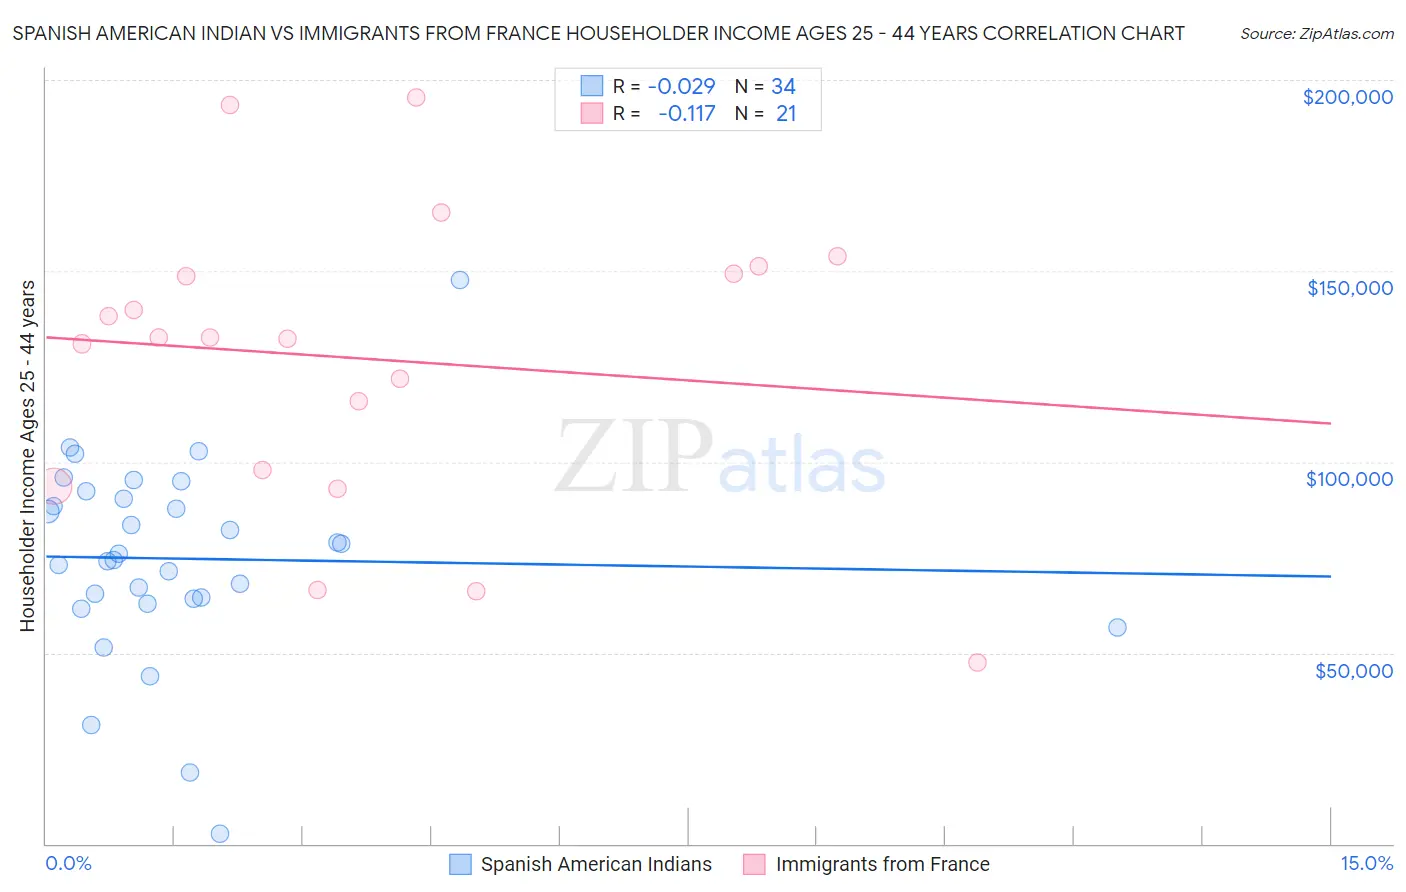 Spanish American Indian vs Immigrants from France Householder Income Ages 25 - 44 years